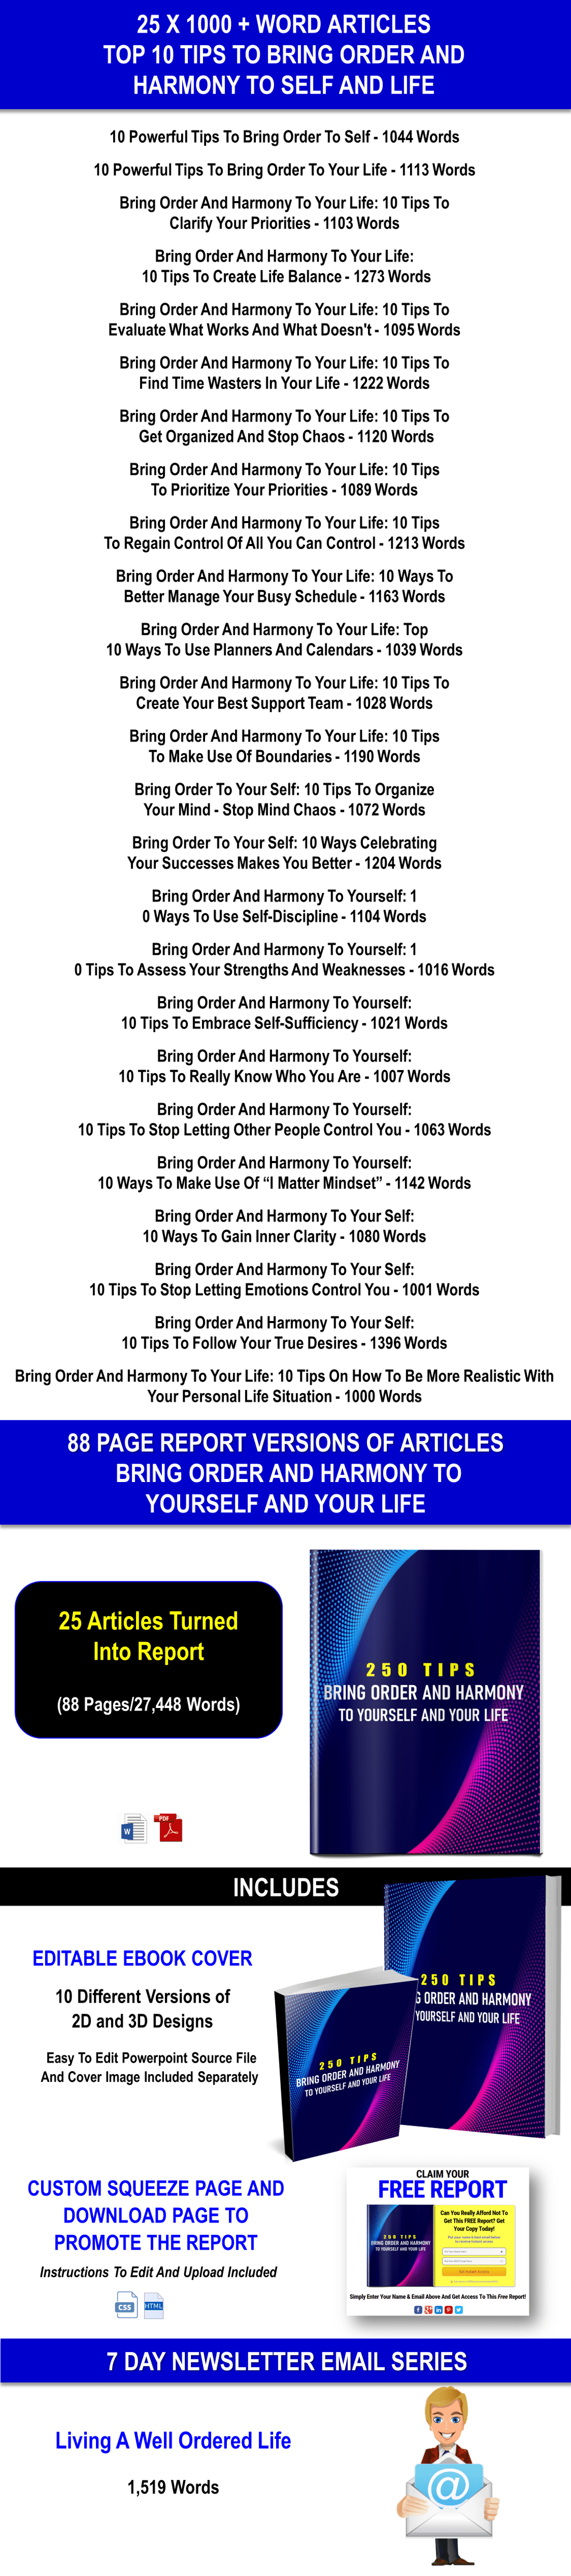 Bring Order And Harmony To Life And Self Content with PLR Rights